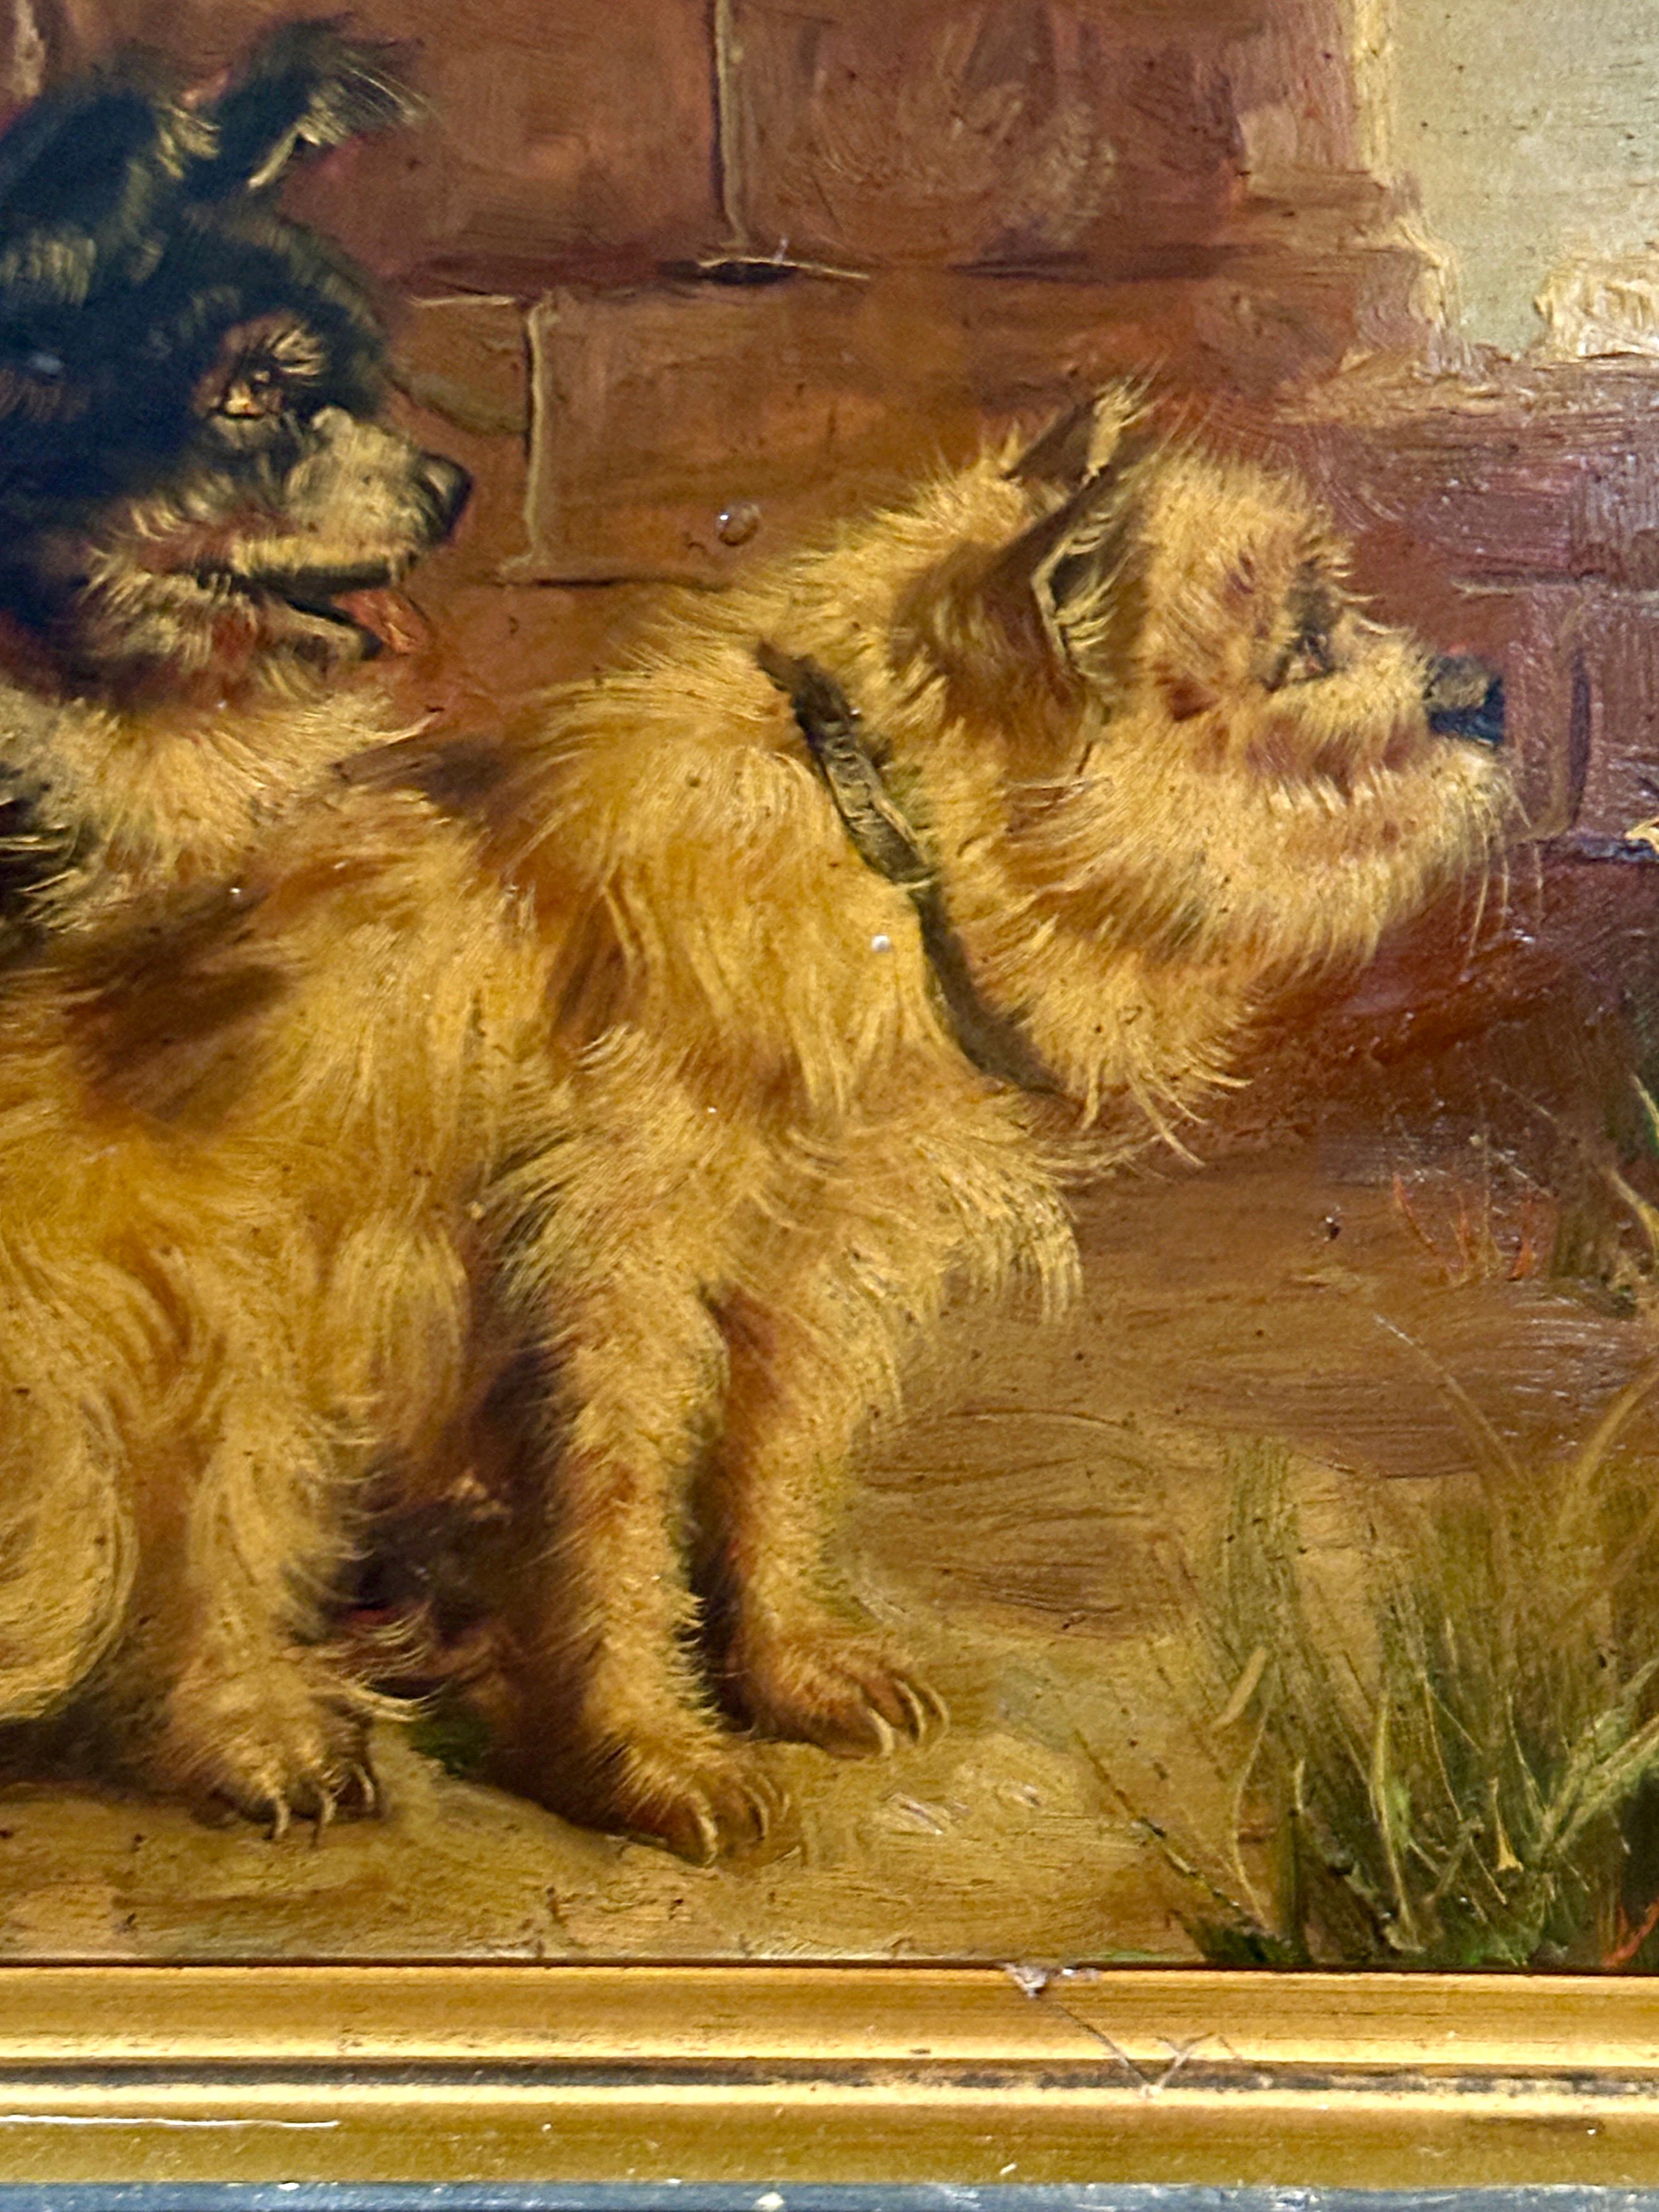 English early 20th century portrait of two dogs, terriers in a landscape - Painting by Lilian Cheviot